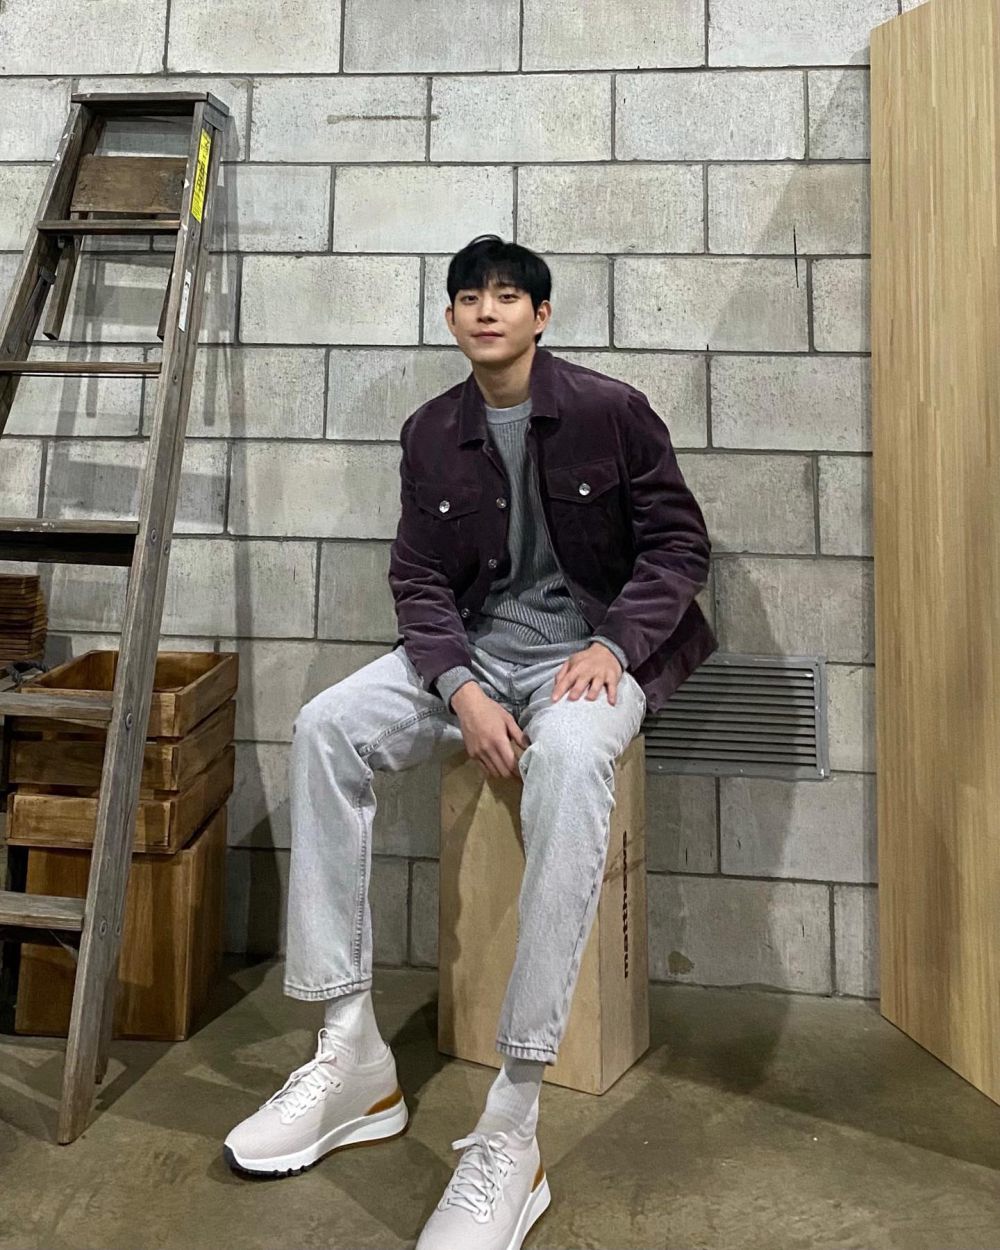 7 Ide Outfit Hangout Minimalis ala Kim Young Dae, Super Comfy!